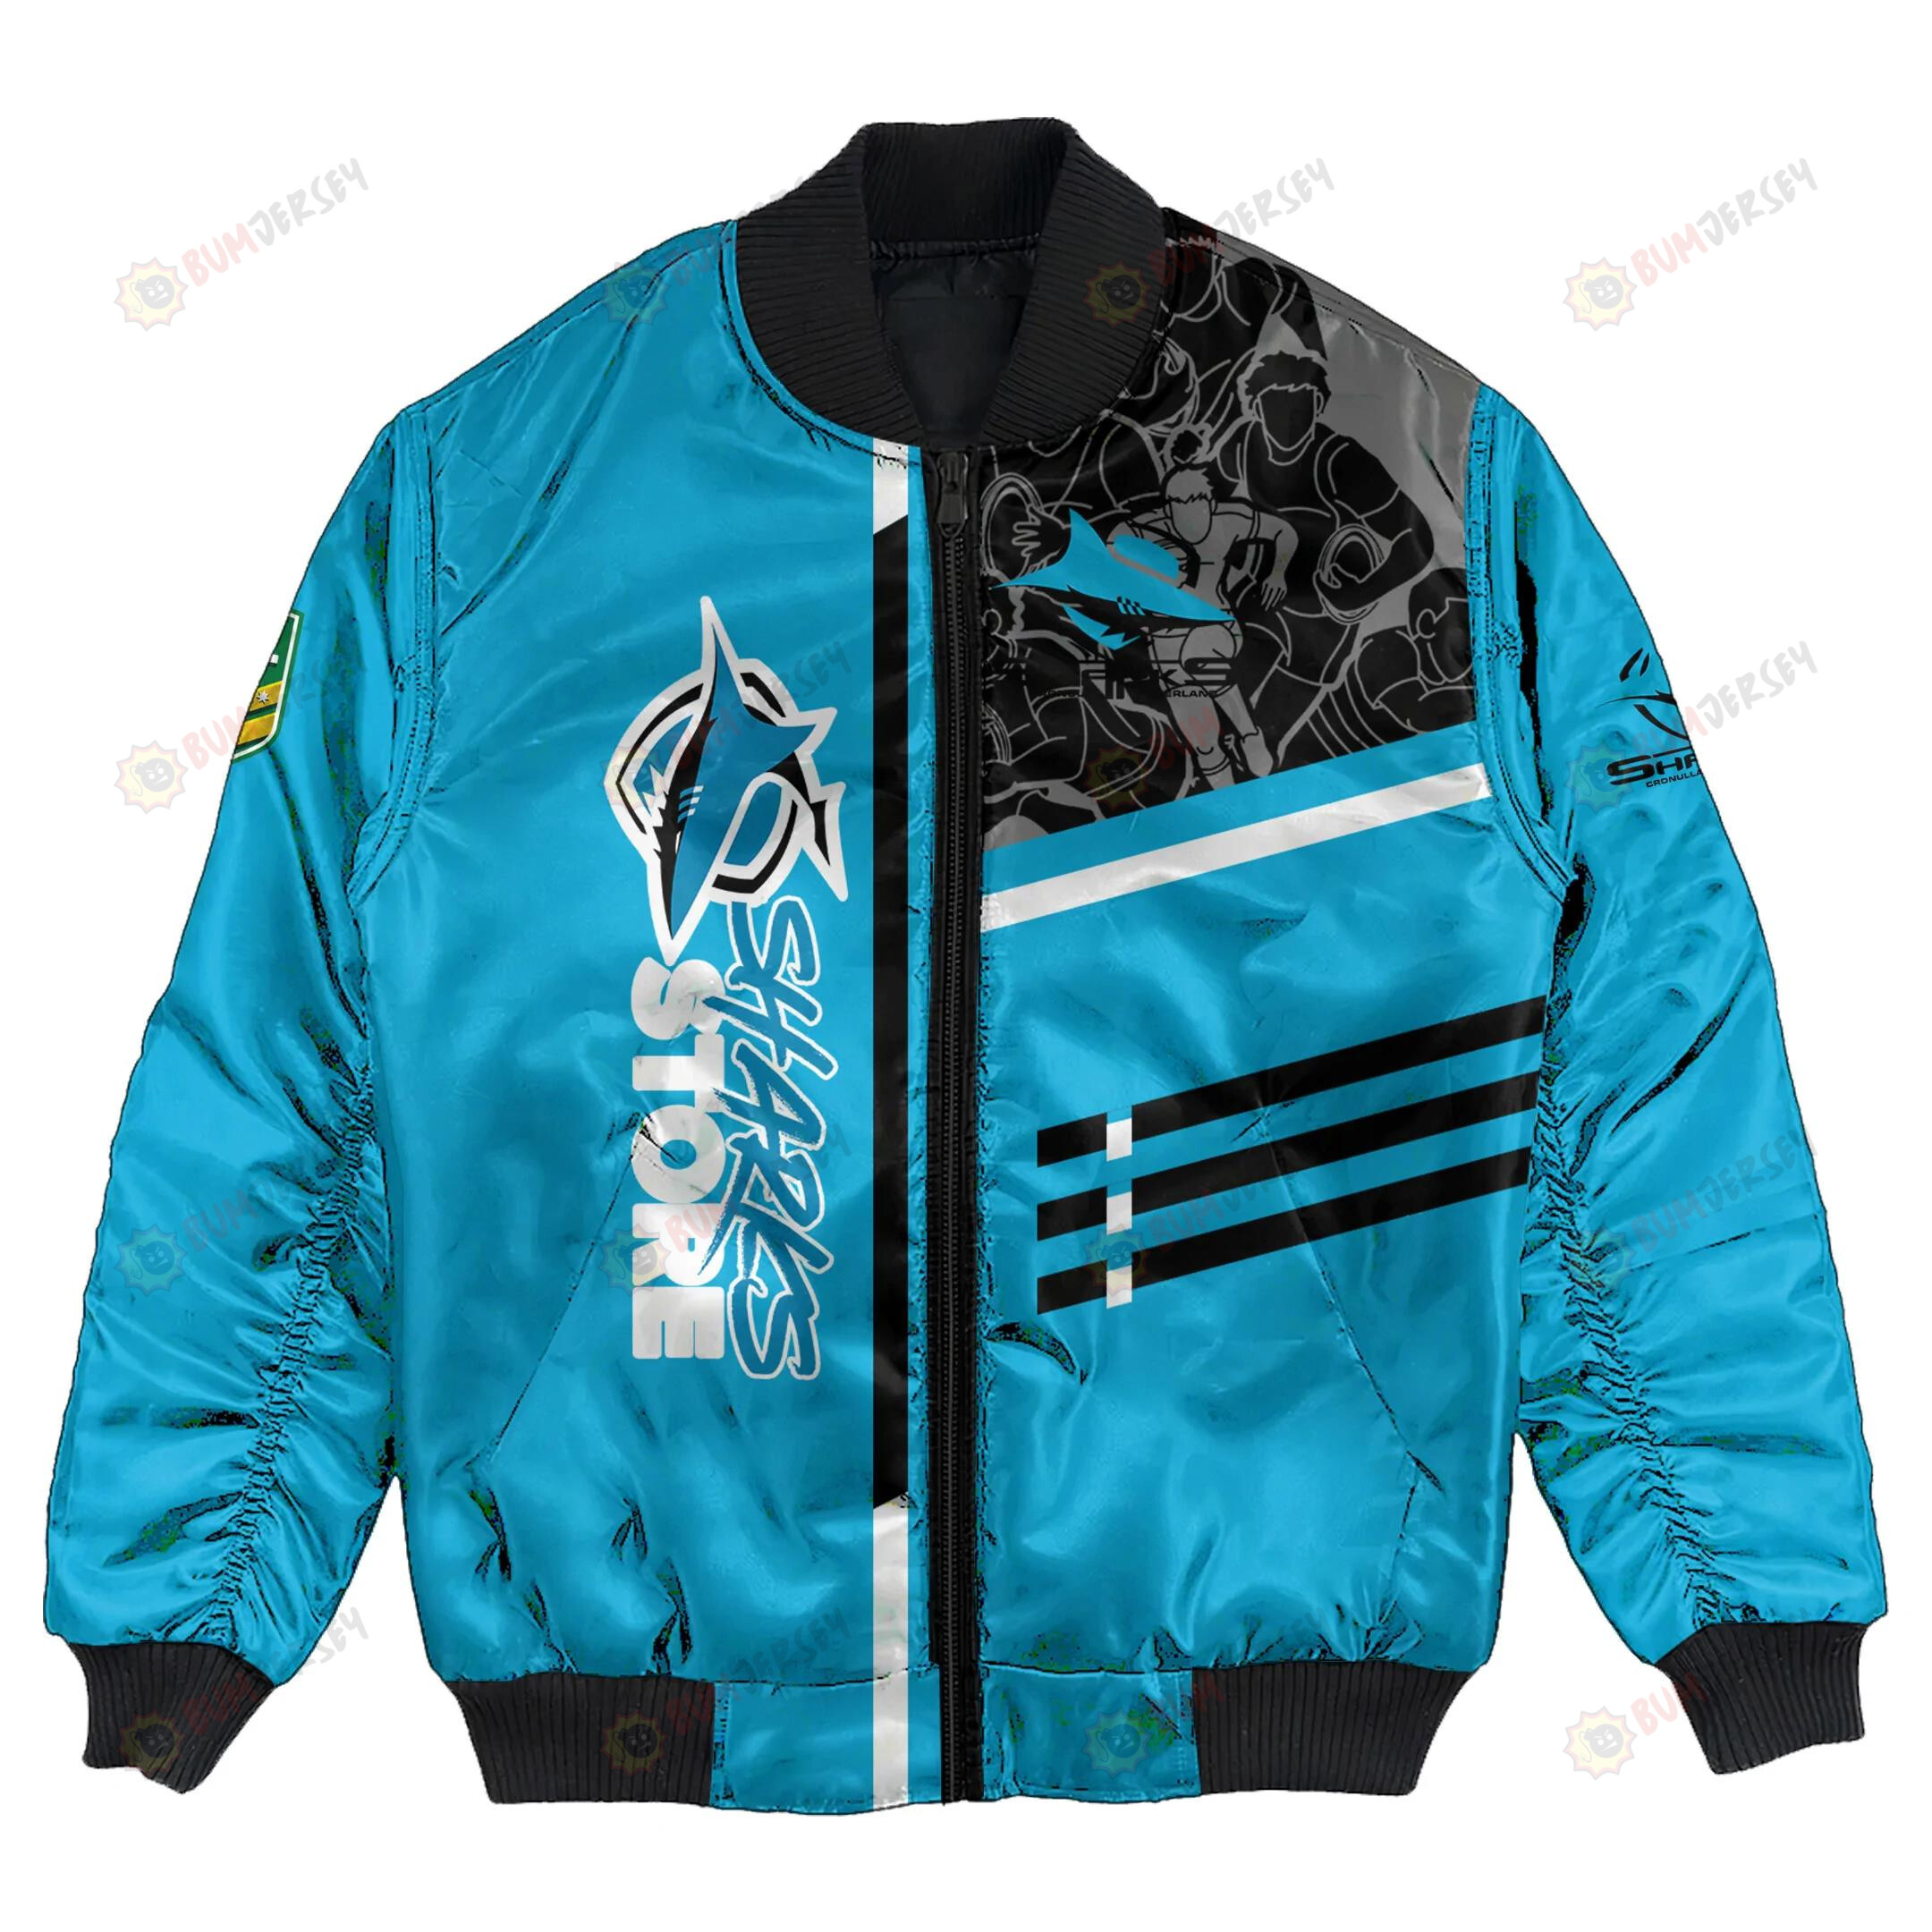 Cronulla-Sutherland Sharks Bomber Jacket 3D Printed Personalized Rugby For Fan